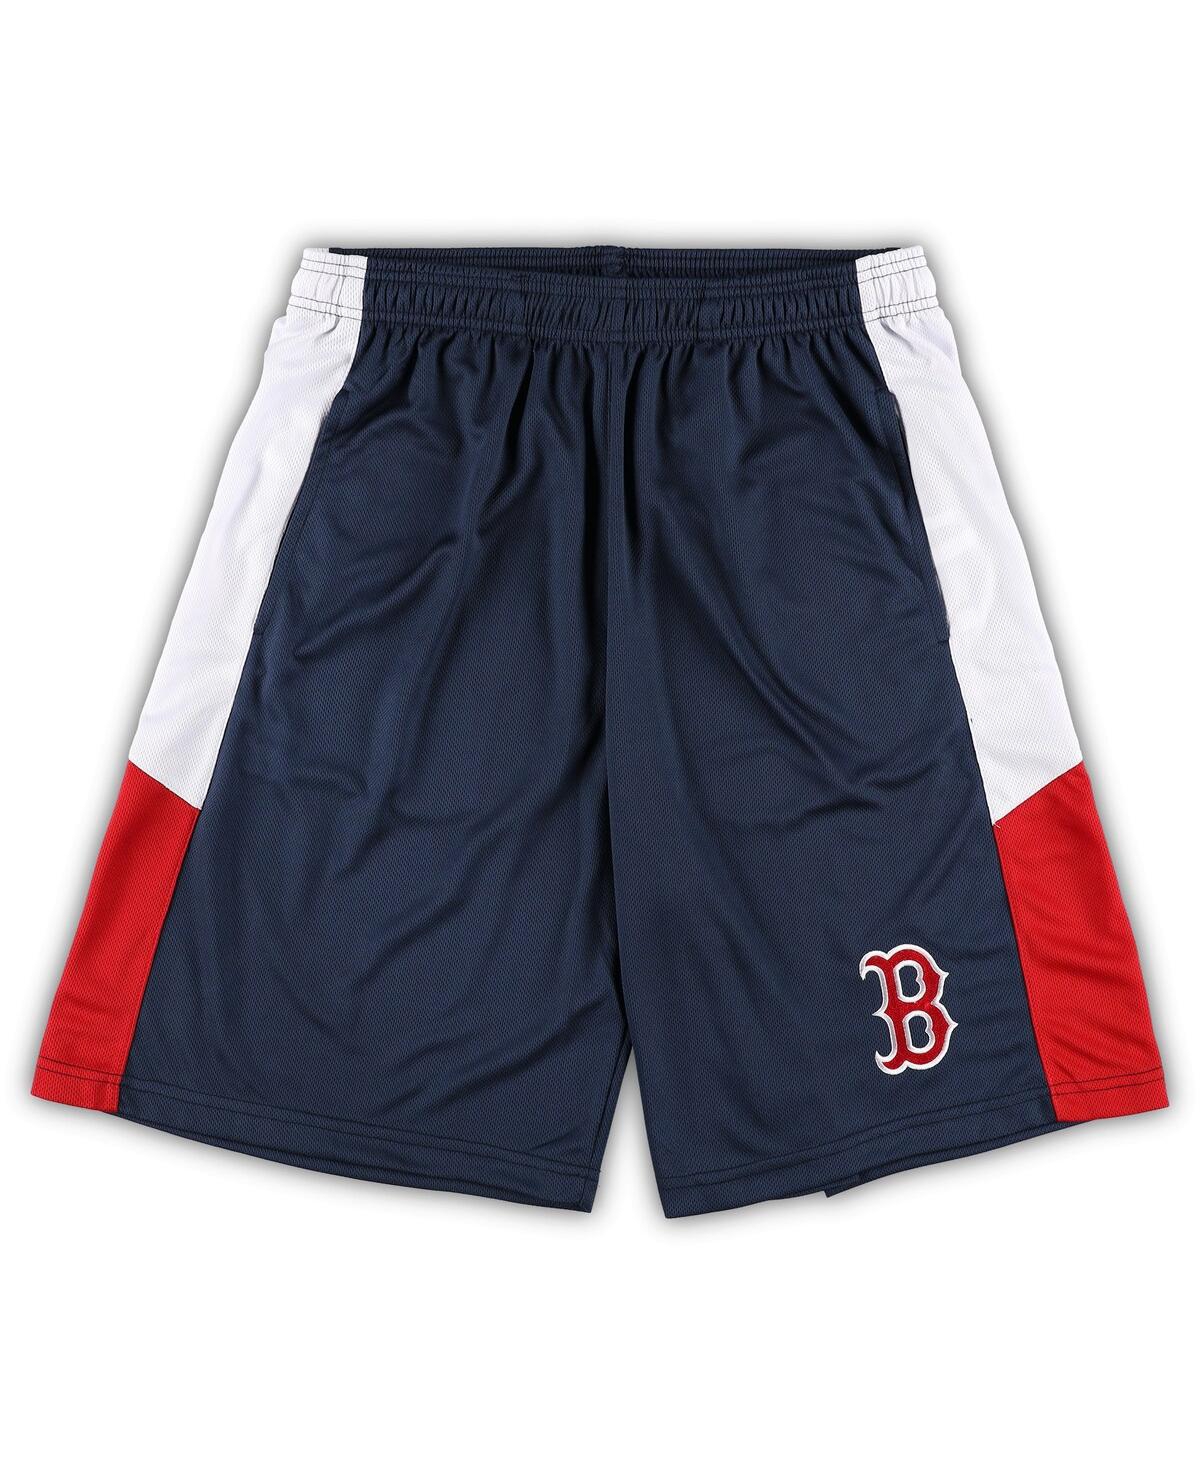 PROFILE MEN'S NAVY BOSTON RED SOX BIG AND TALL TEAM SHORTS